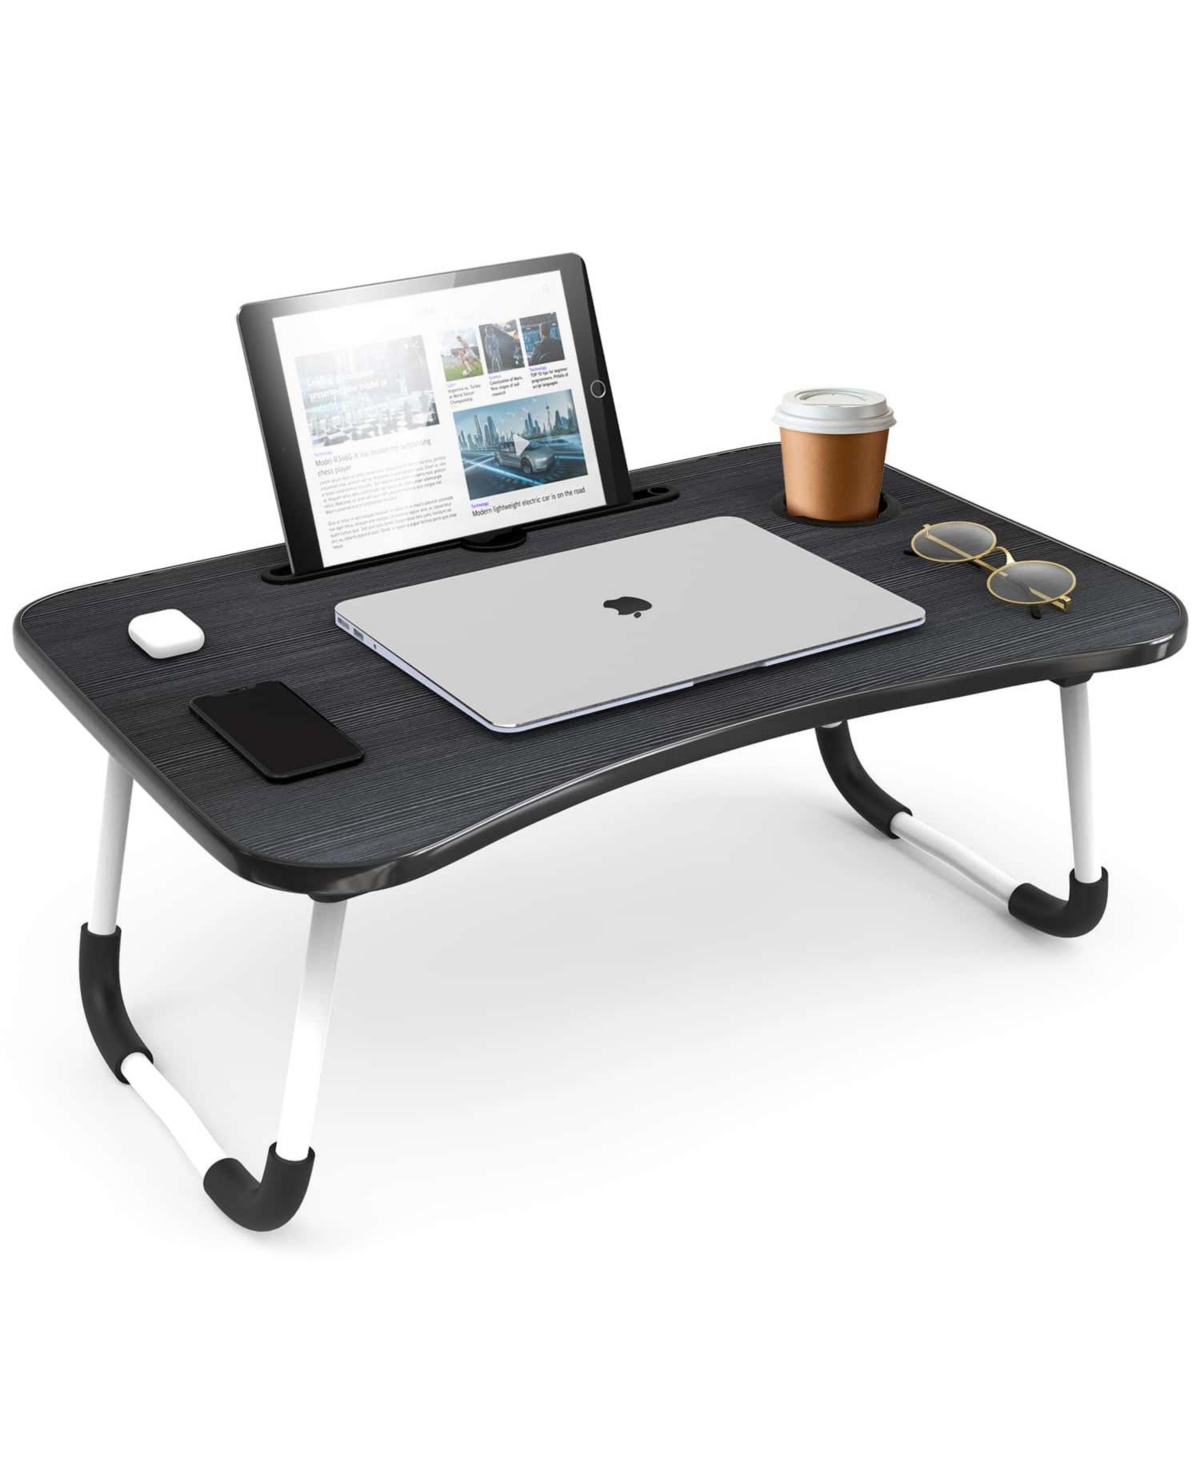 Foldable Lap Desk - Portable & Lightweight - Ideal for Working, Reading, or Eating - Large - Gray wood